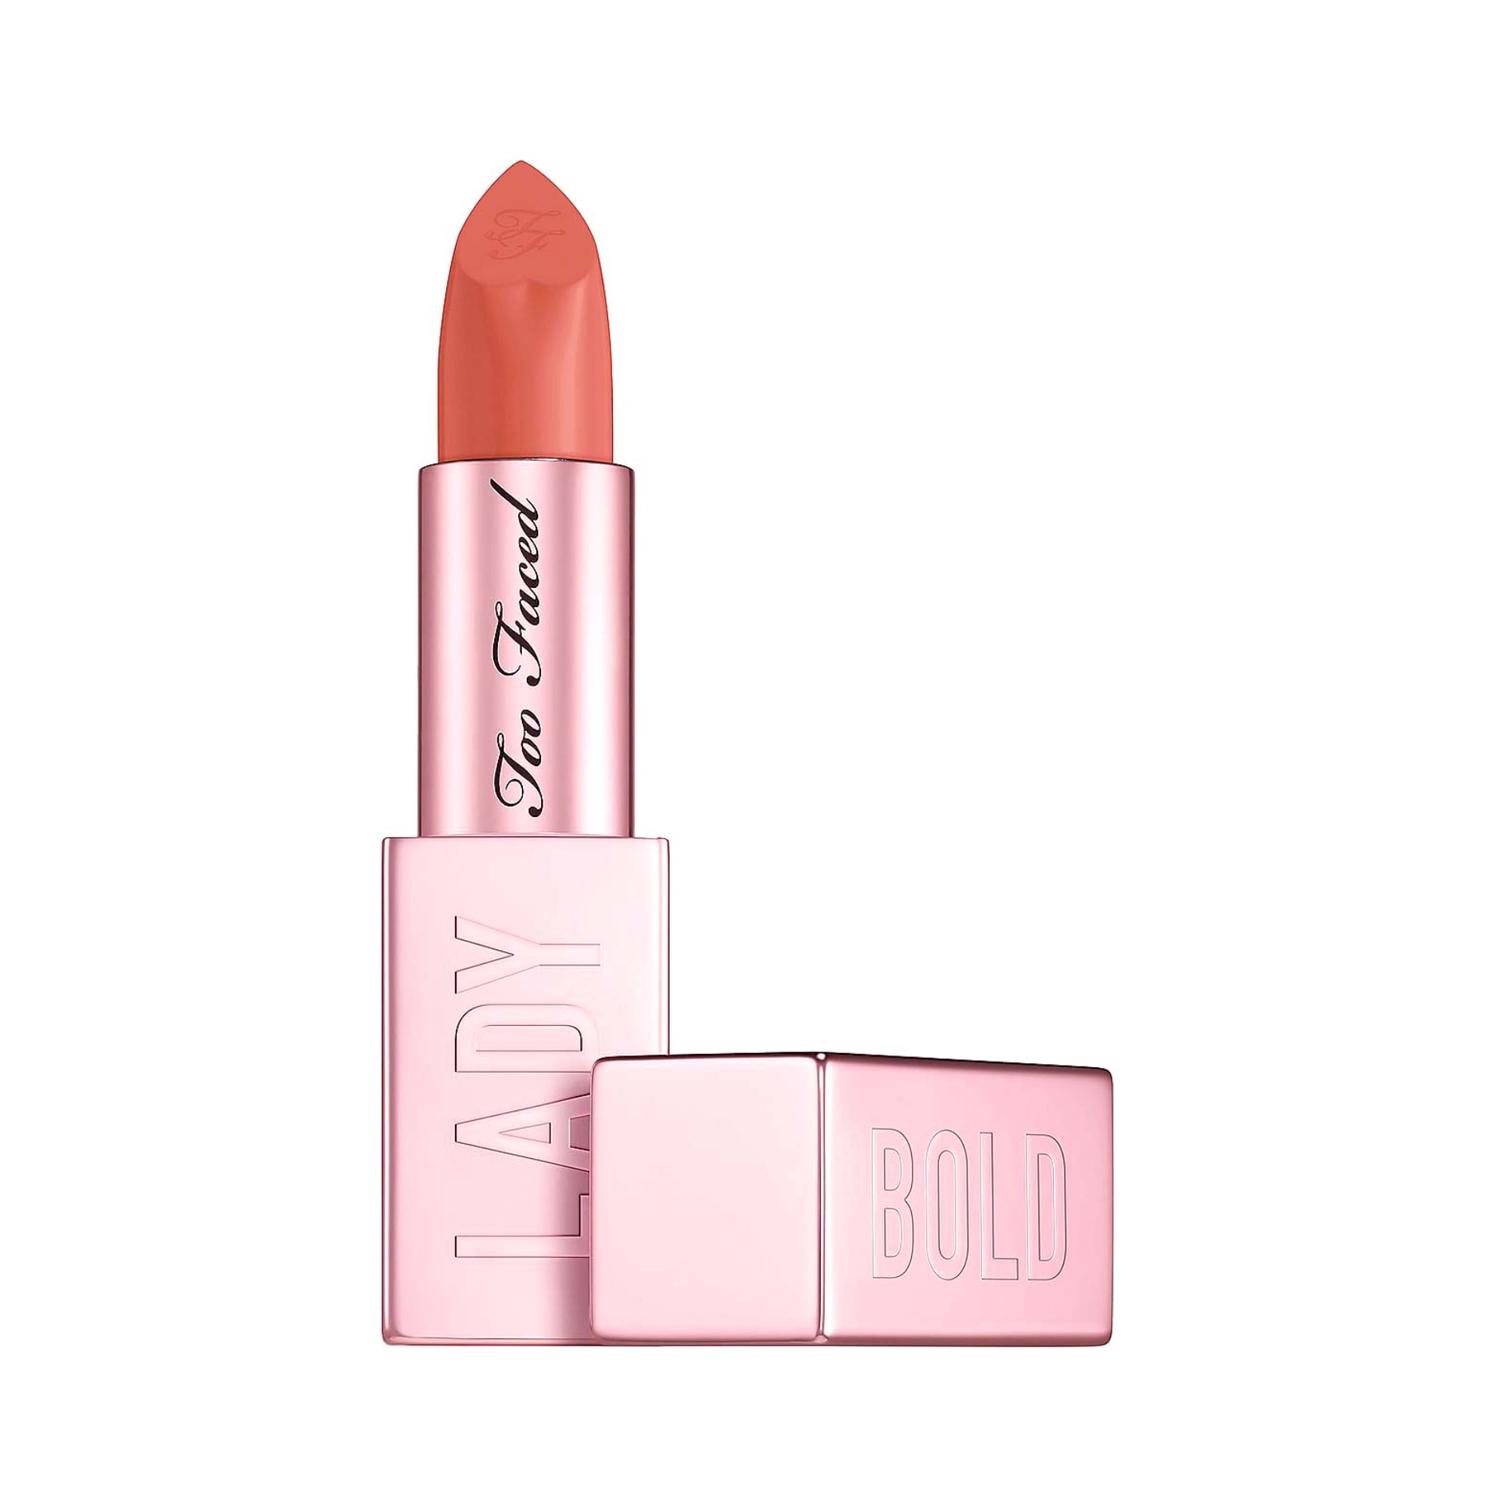 Too Faced Lady Bold Cream Lipstick - Come Back Queen (4g)